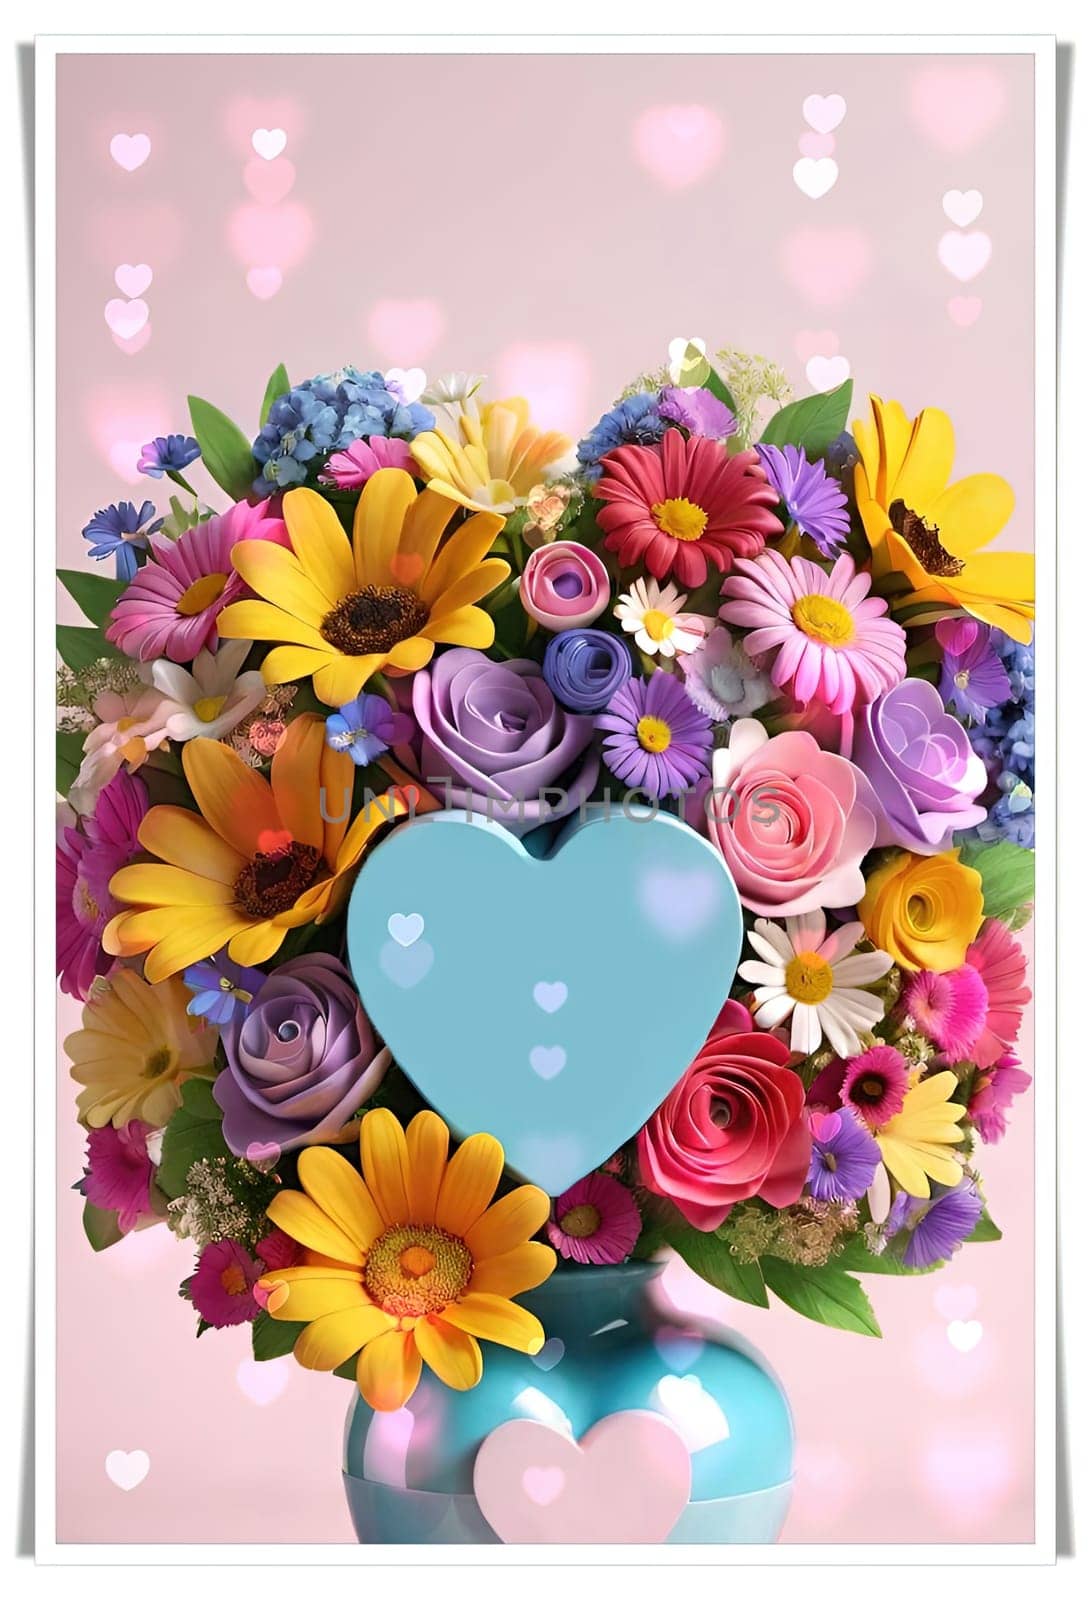 Bouquet of colorful flowers in a vase with a heart. by yilmazsavaskandag